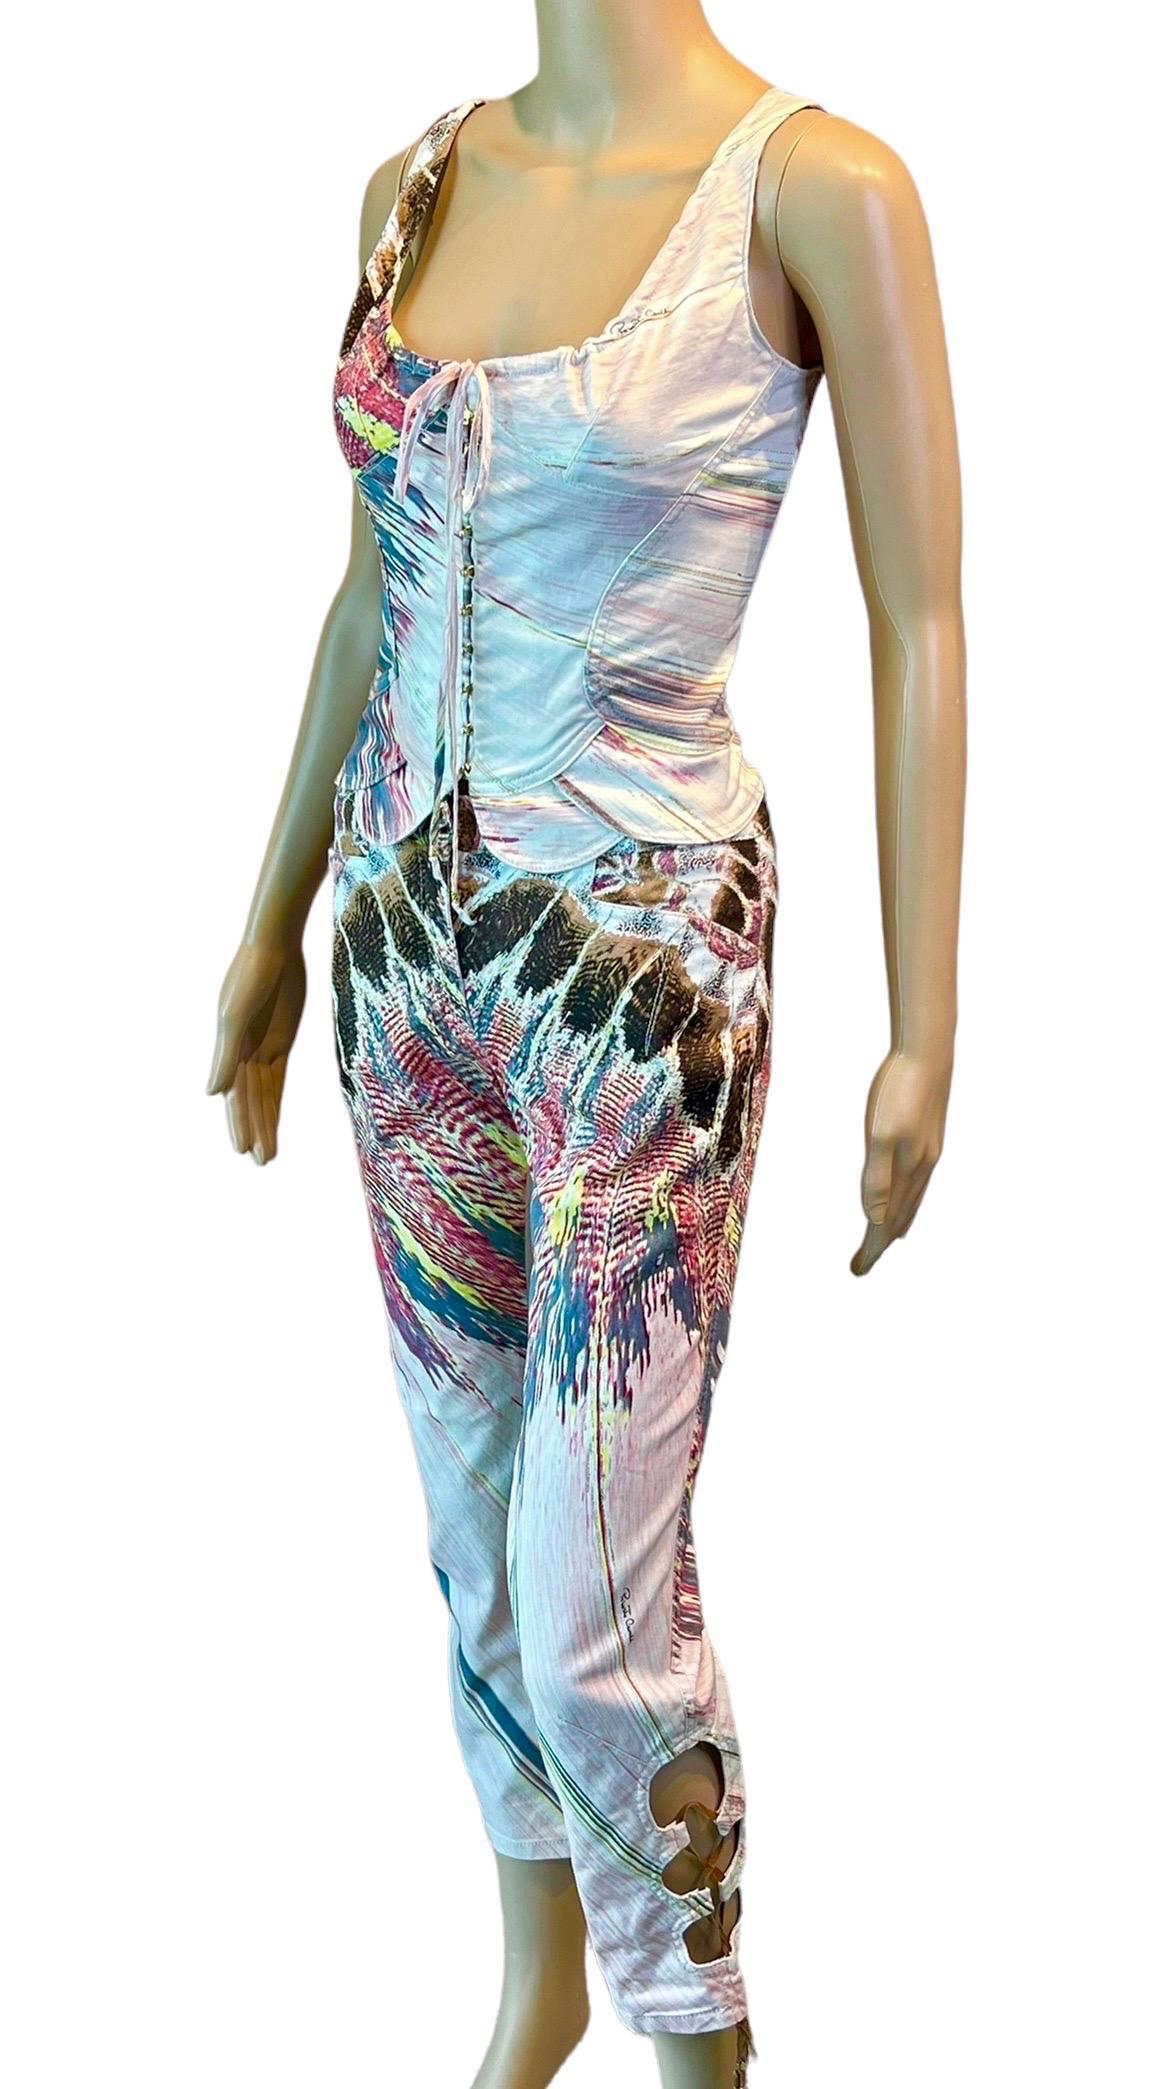 Roberto Cavalli S/S 2004 Feather Print Bustier Corset Top & Pants Ensemble 2 Piece Set Size S/XS

Please note bustier top is size XS and the pants are size S.

